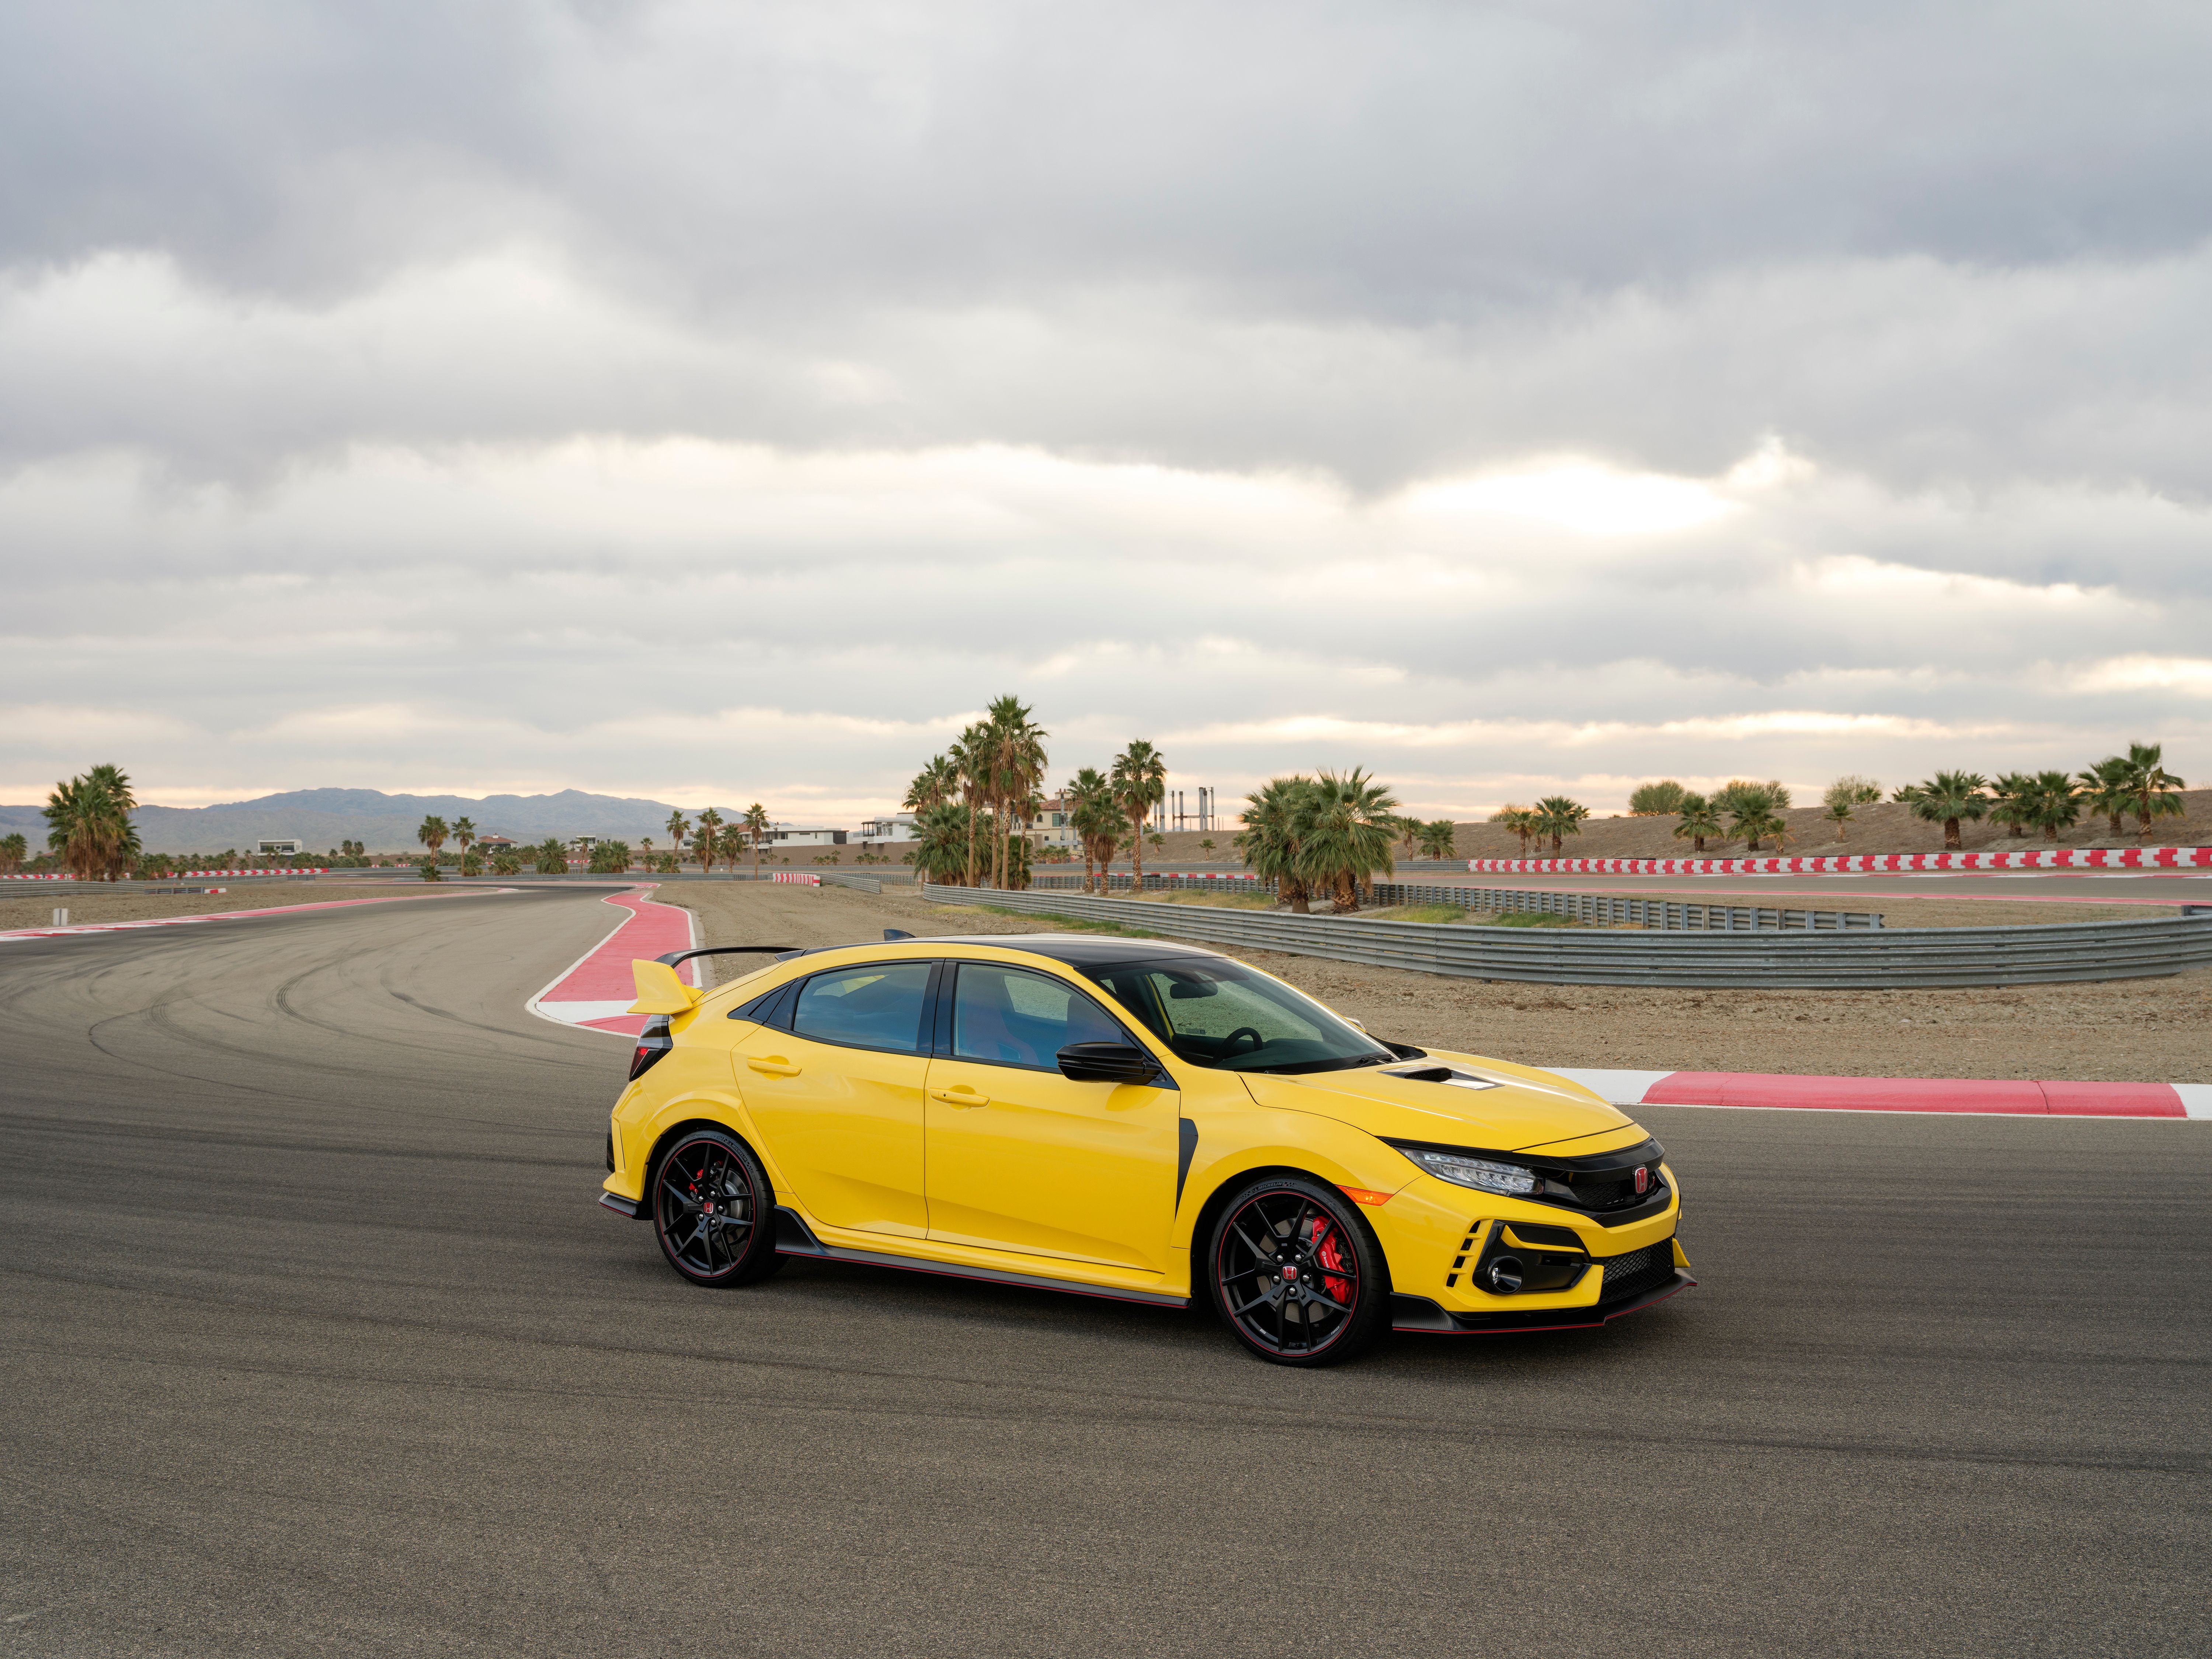 2021 Honda Civic Type R Limited Edition - Driven